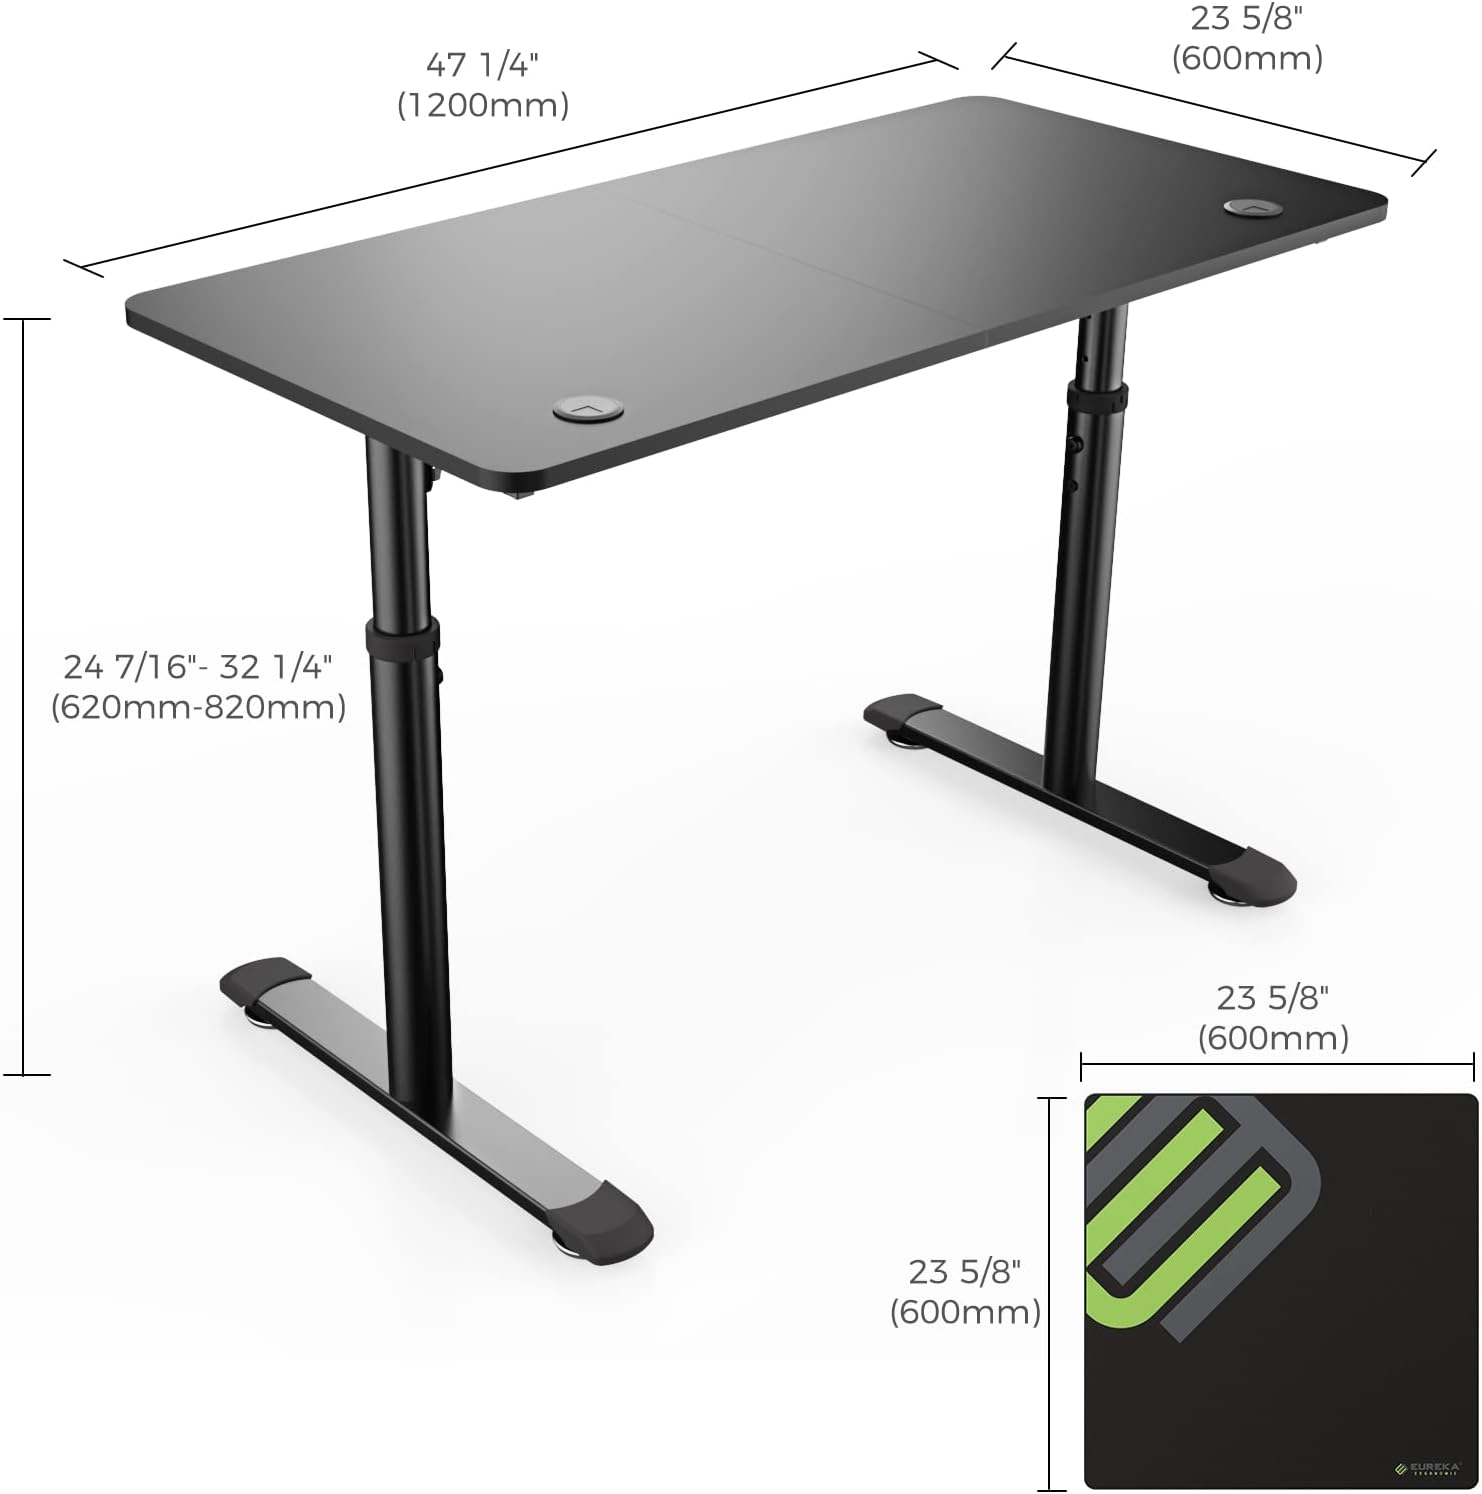 (Renewed) Eureka Ergonomic Office Table- Height Adjustable, 47 Inches with Free Large Mousepad